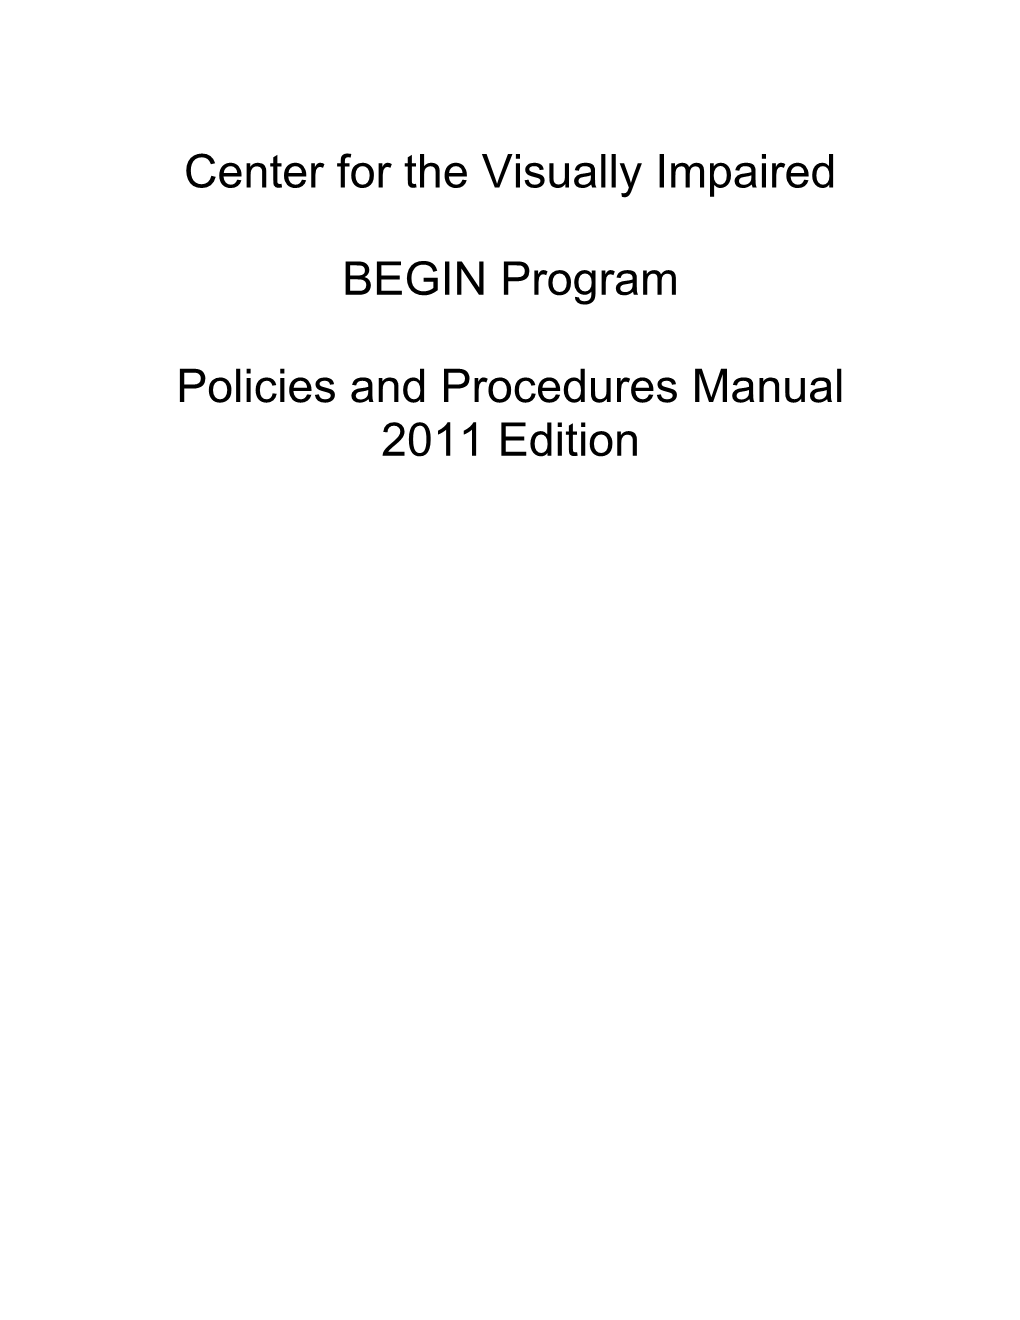 Center for the Visually Impaired